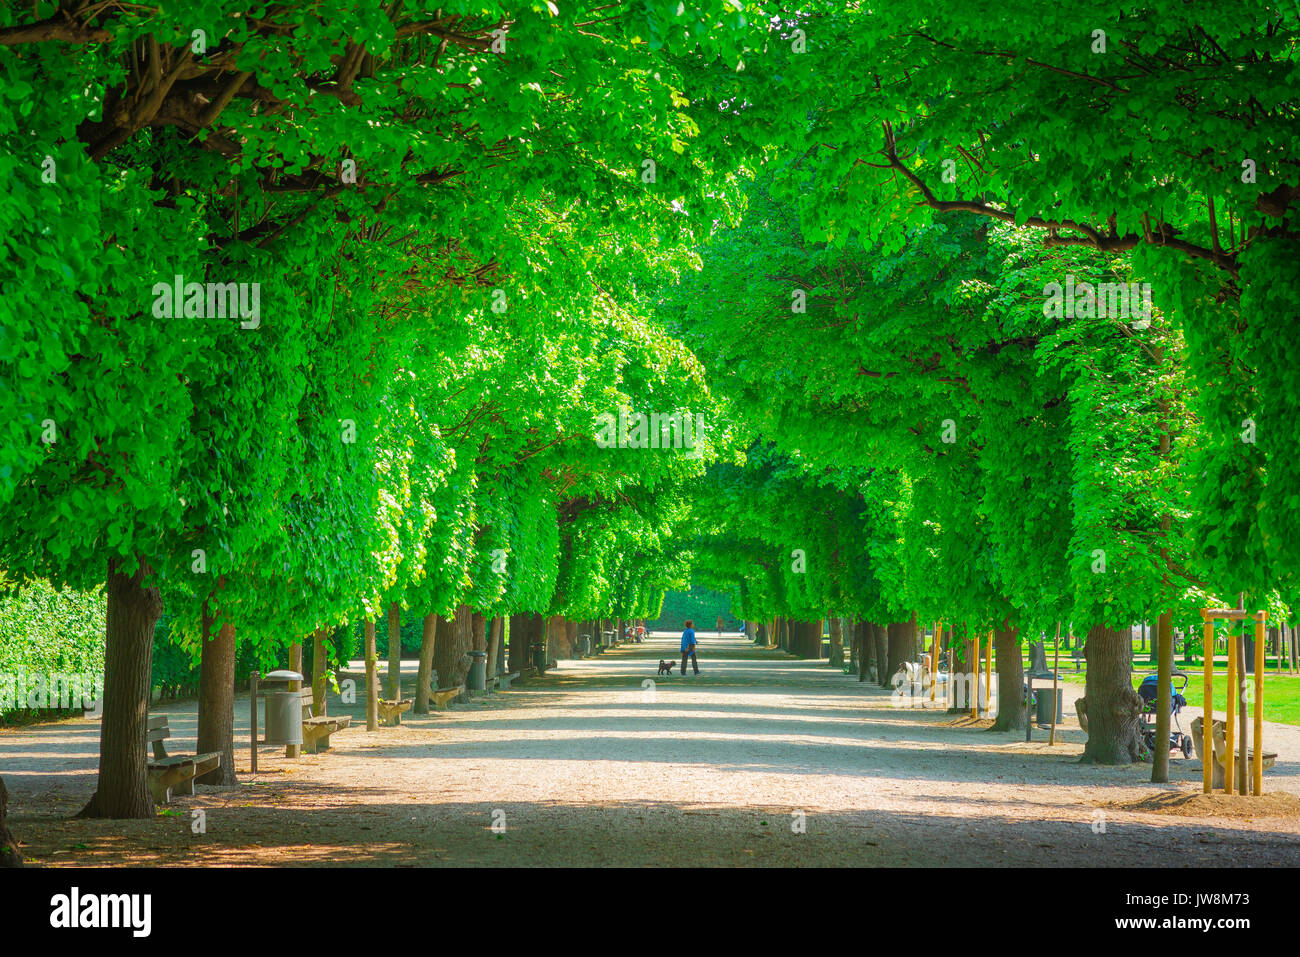 Vienna park summer, view of a tree-lined avenue in the Augarten park in the Leopoldstadt district of Vienna, Wien, Austria. Stock Photo